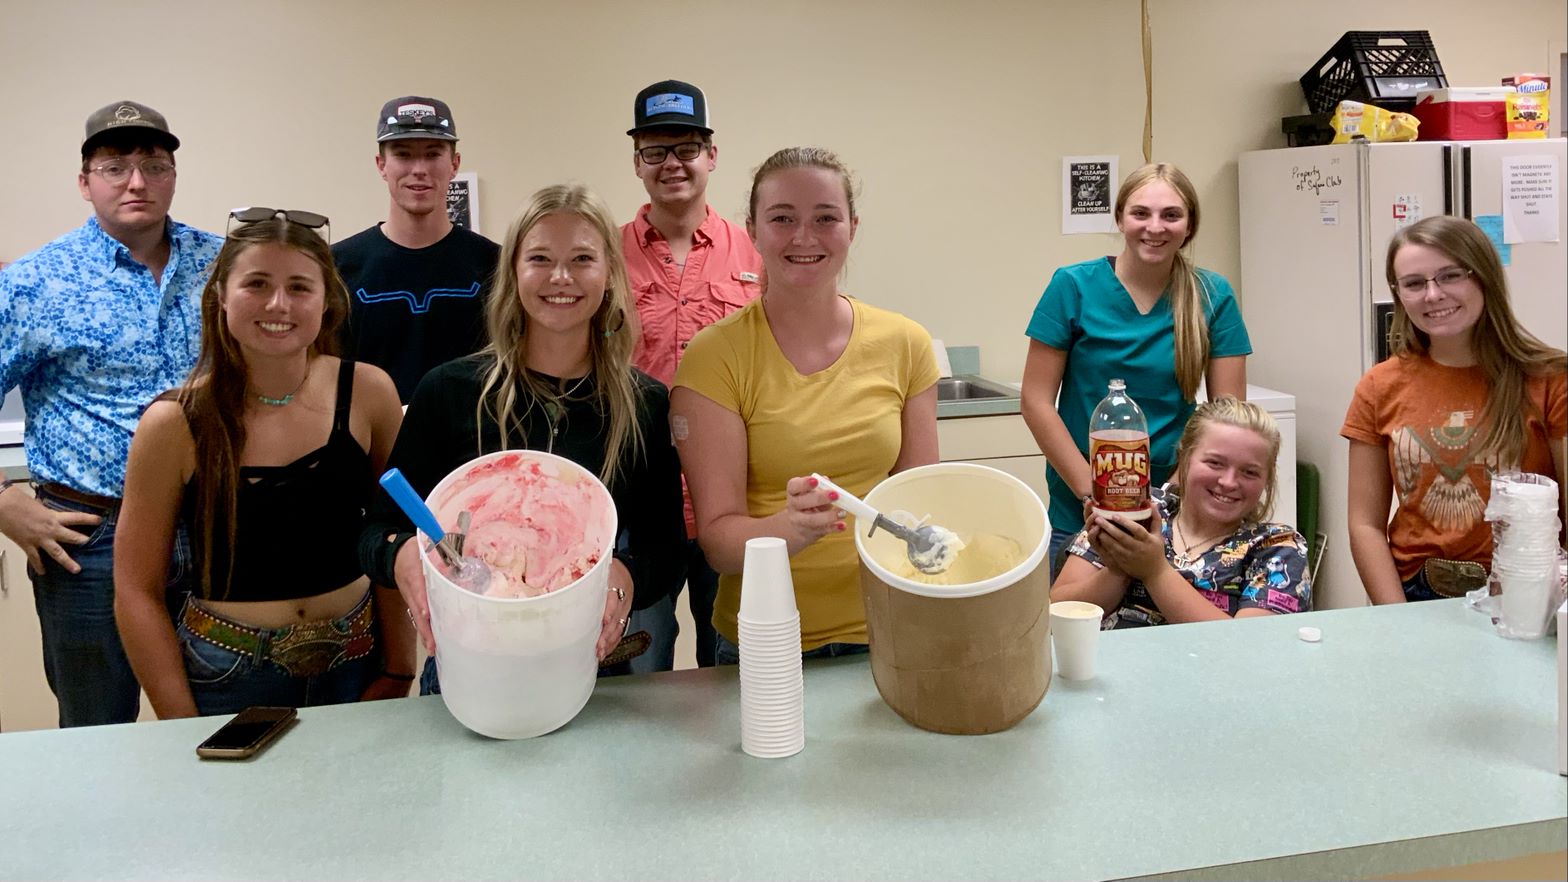 Aggies with the NCTA Ranch Horse Team hosted an ice cream social with root beer floats at the Livestock Teaching Complex on the first day of classes. Students are named in the adjoining story. (Andela Taylor / NCTA photo)